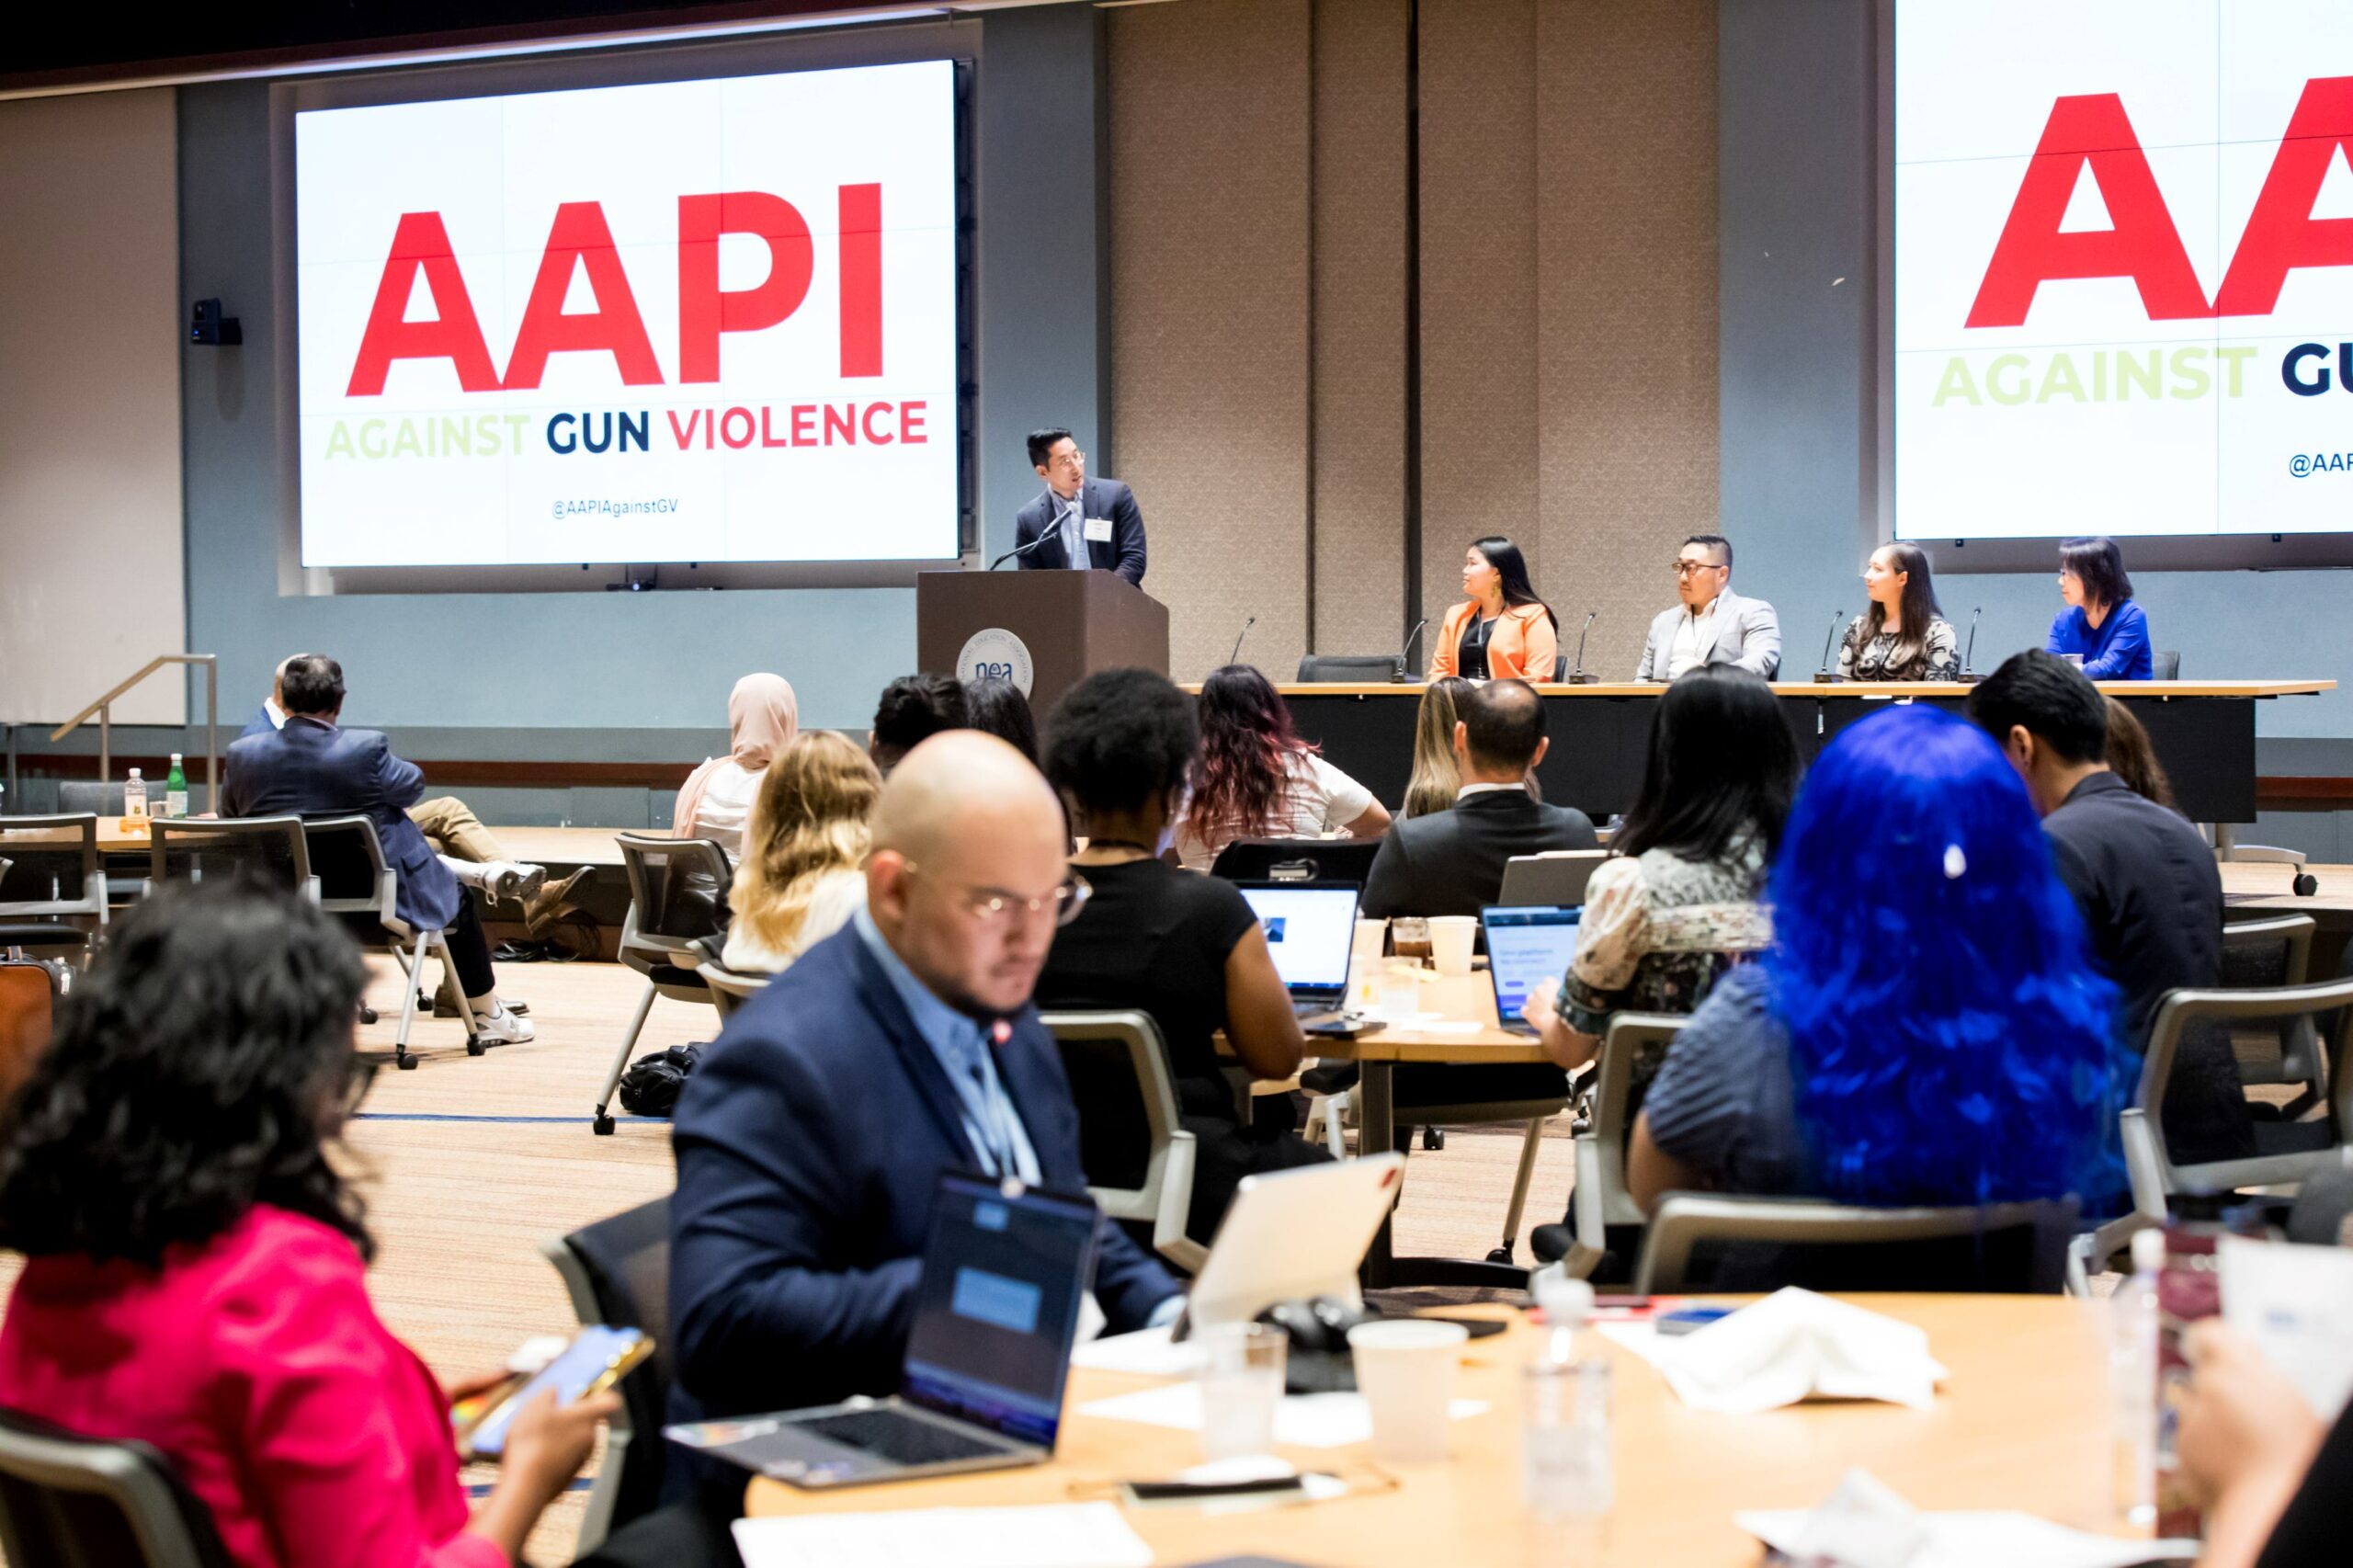 Second convening of AAPI Against Gun Violence